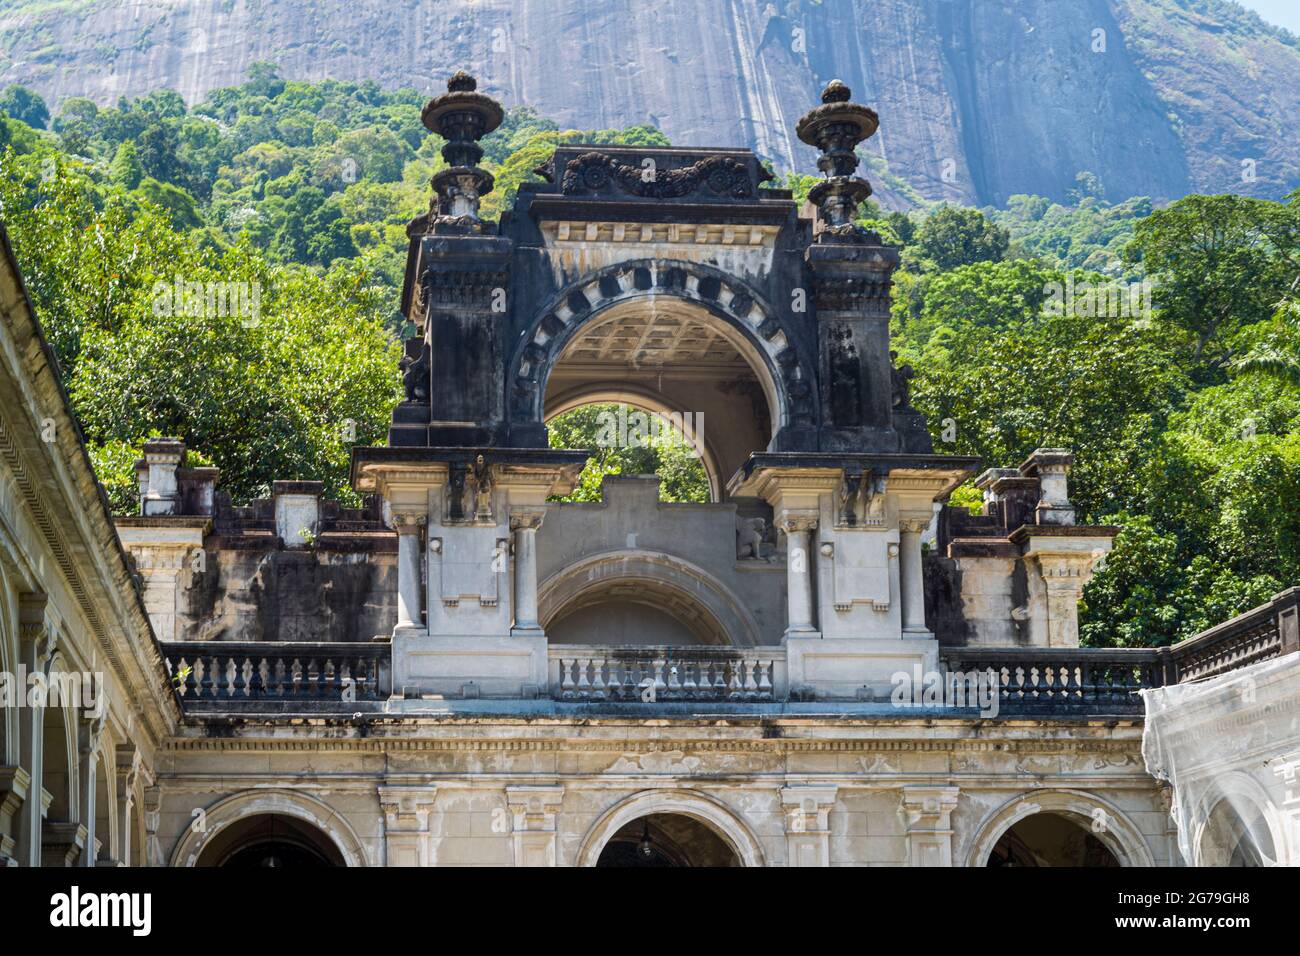 Courtyard of the mansion of Parque Lage. Visual Arts School and a cafe are open to the public. Rio de Janeiro, Brazil Stock Photo